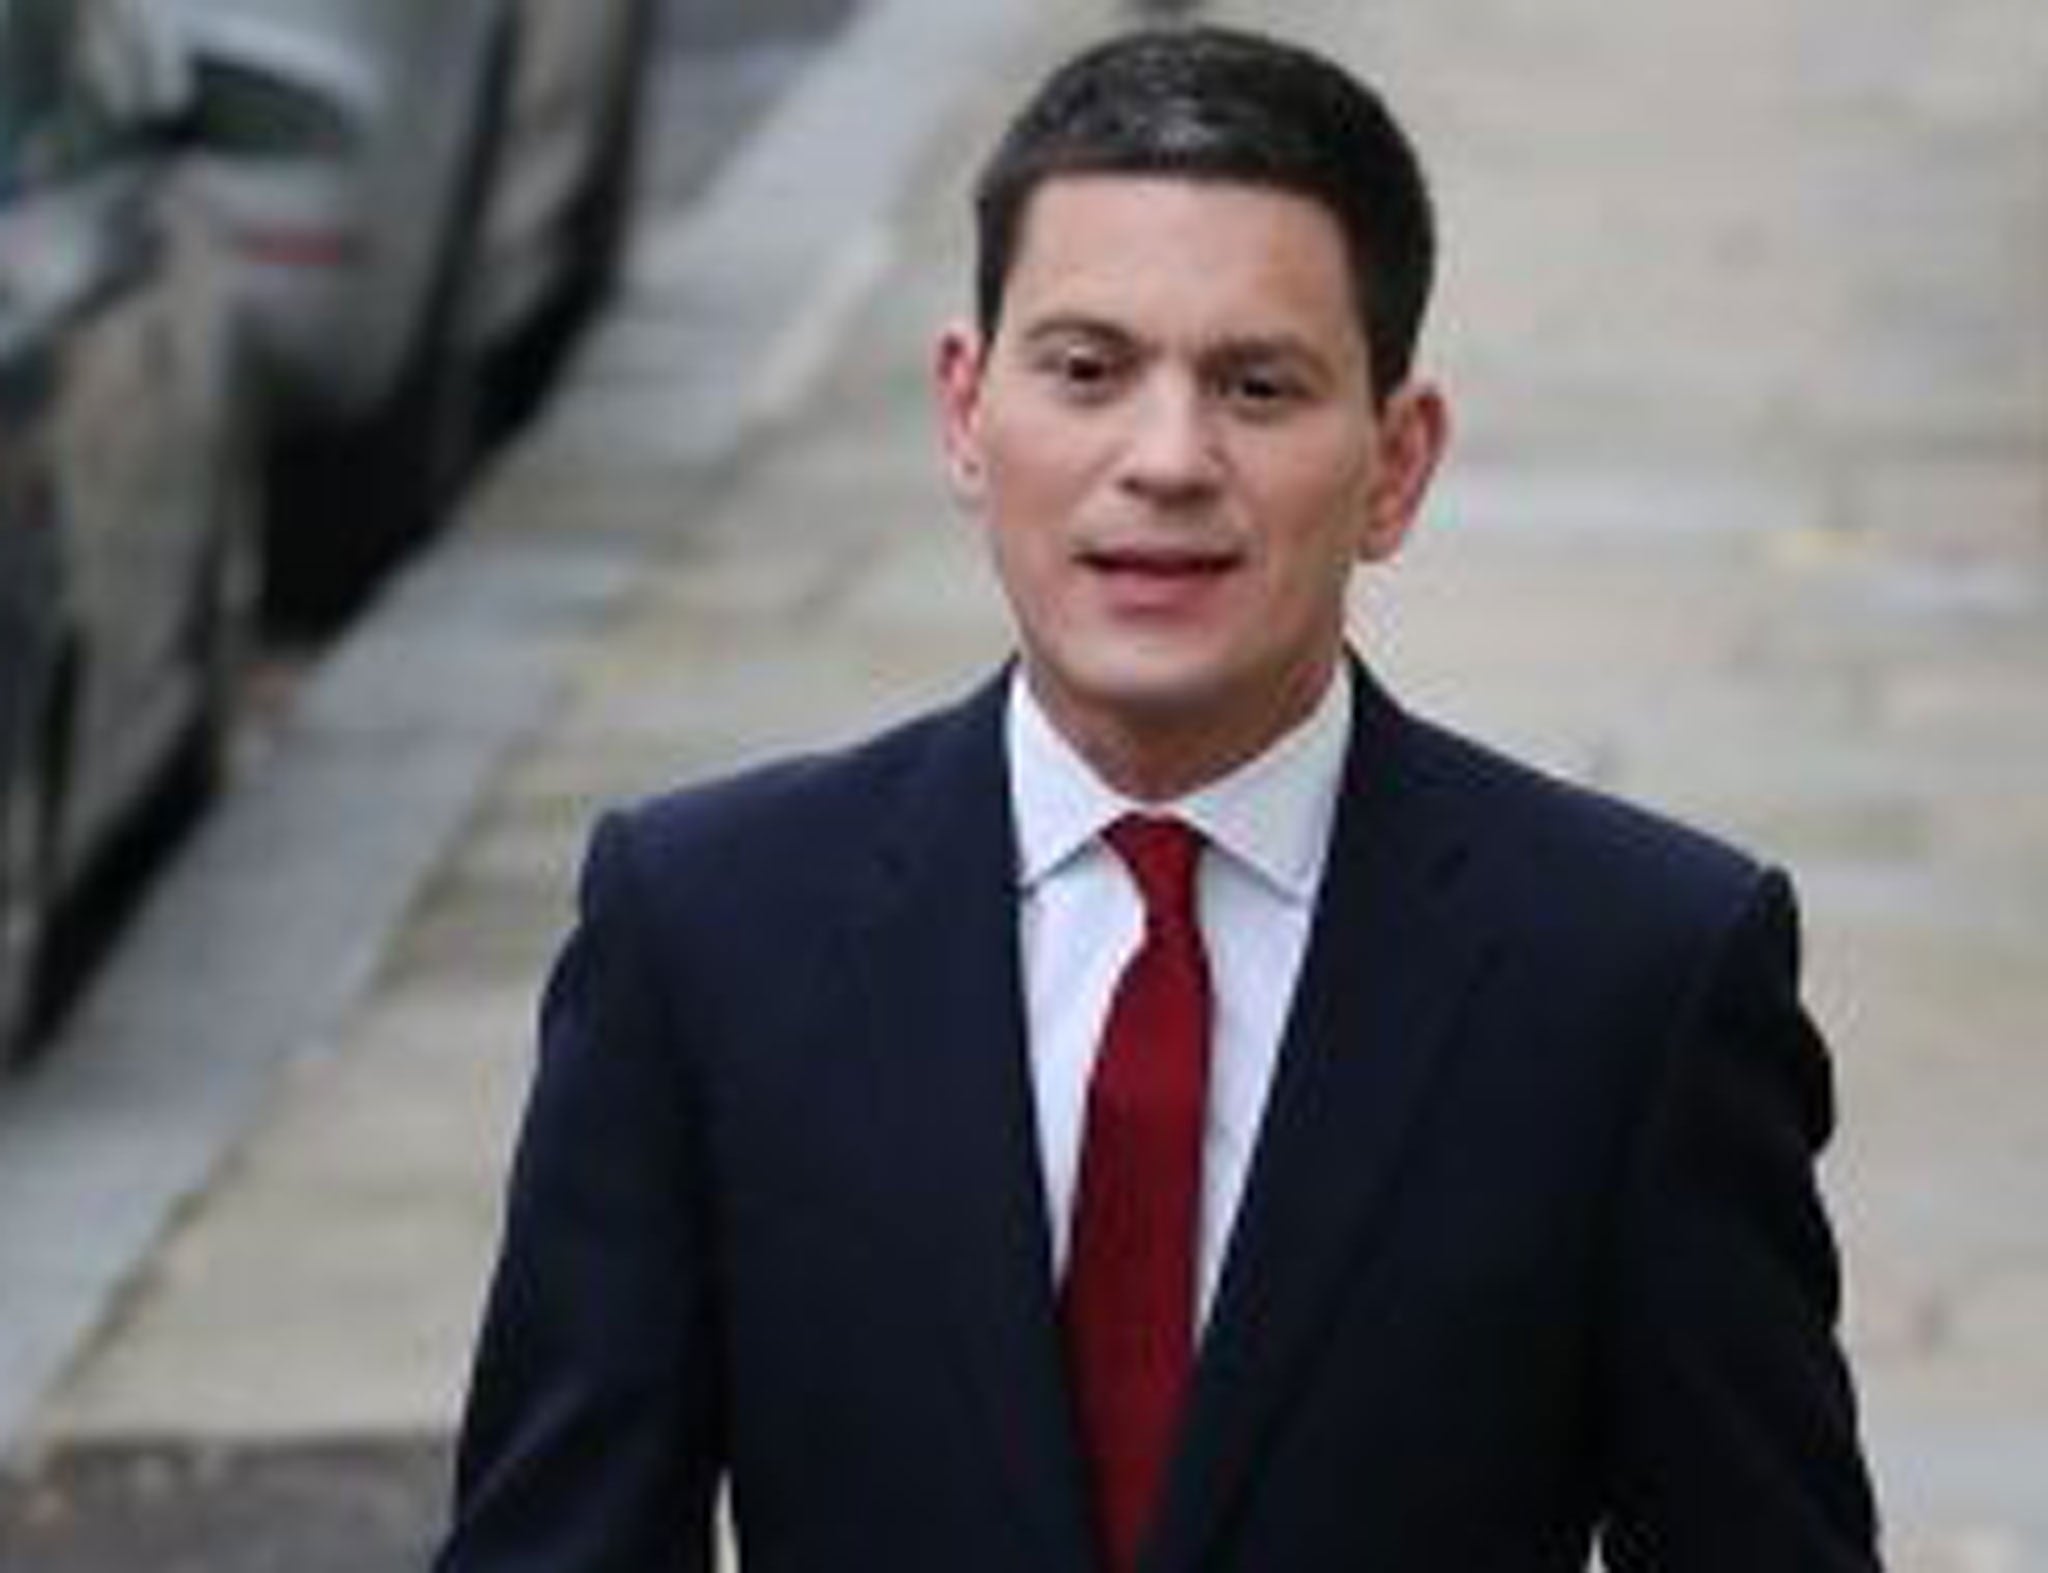 David Miliband will step down as MP for South Shields